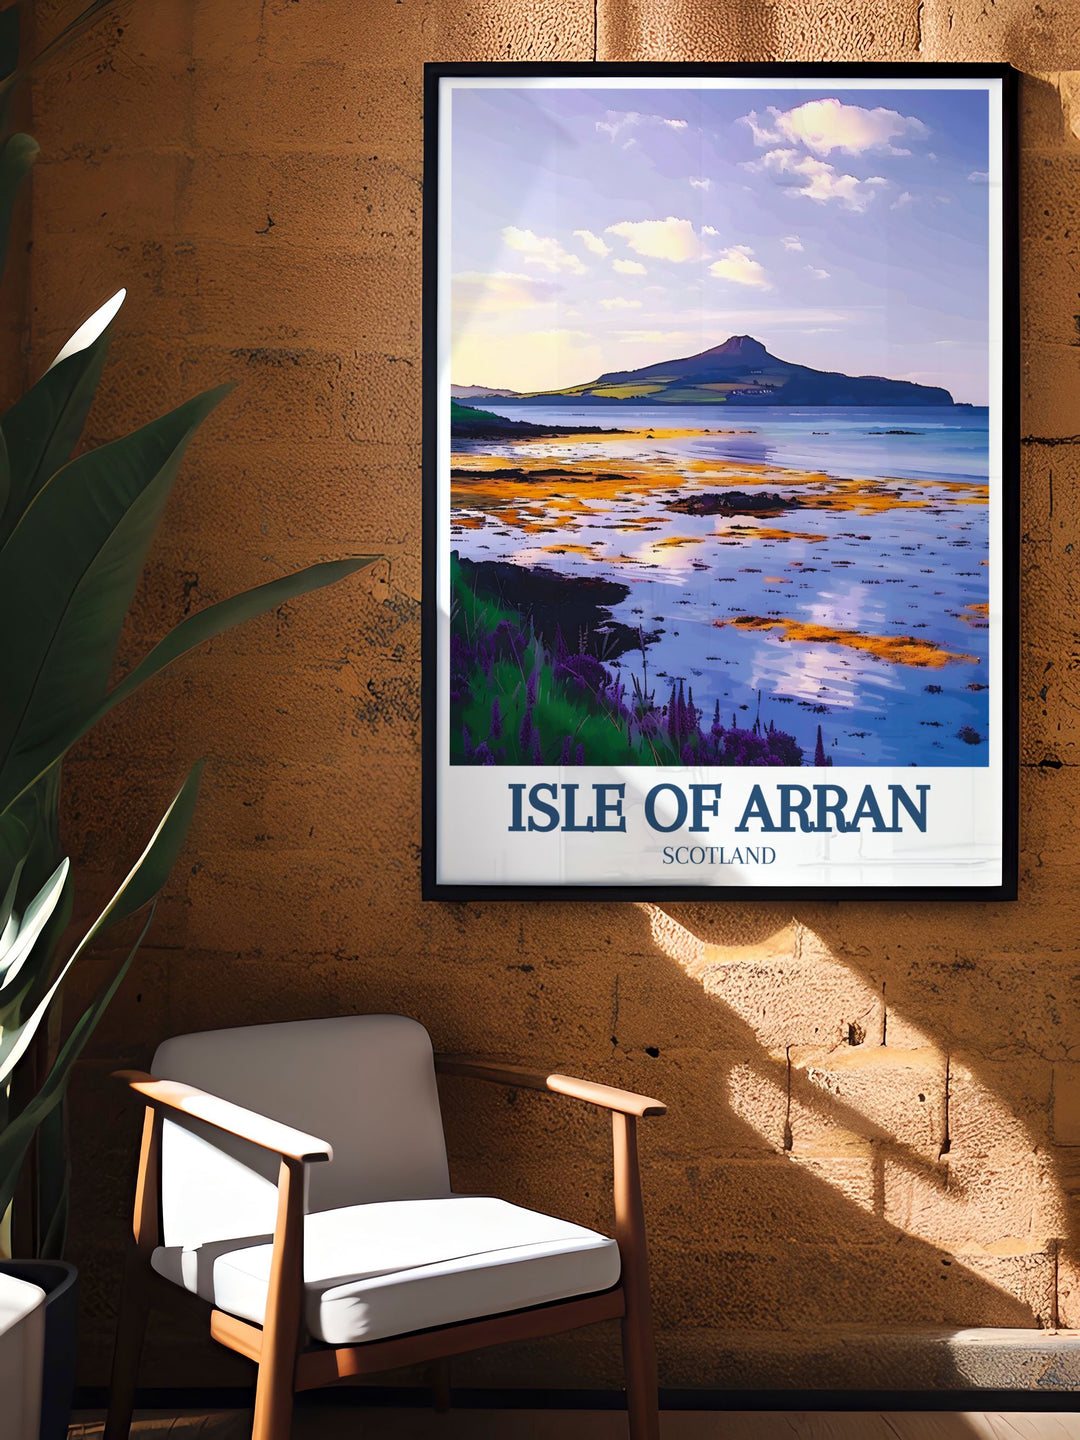 Vintage poster of the Isle of Arran, highlighting the serene landscapes of Holy Isle and the inviting shores of Blackwaterfoot Beach.